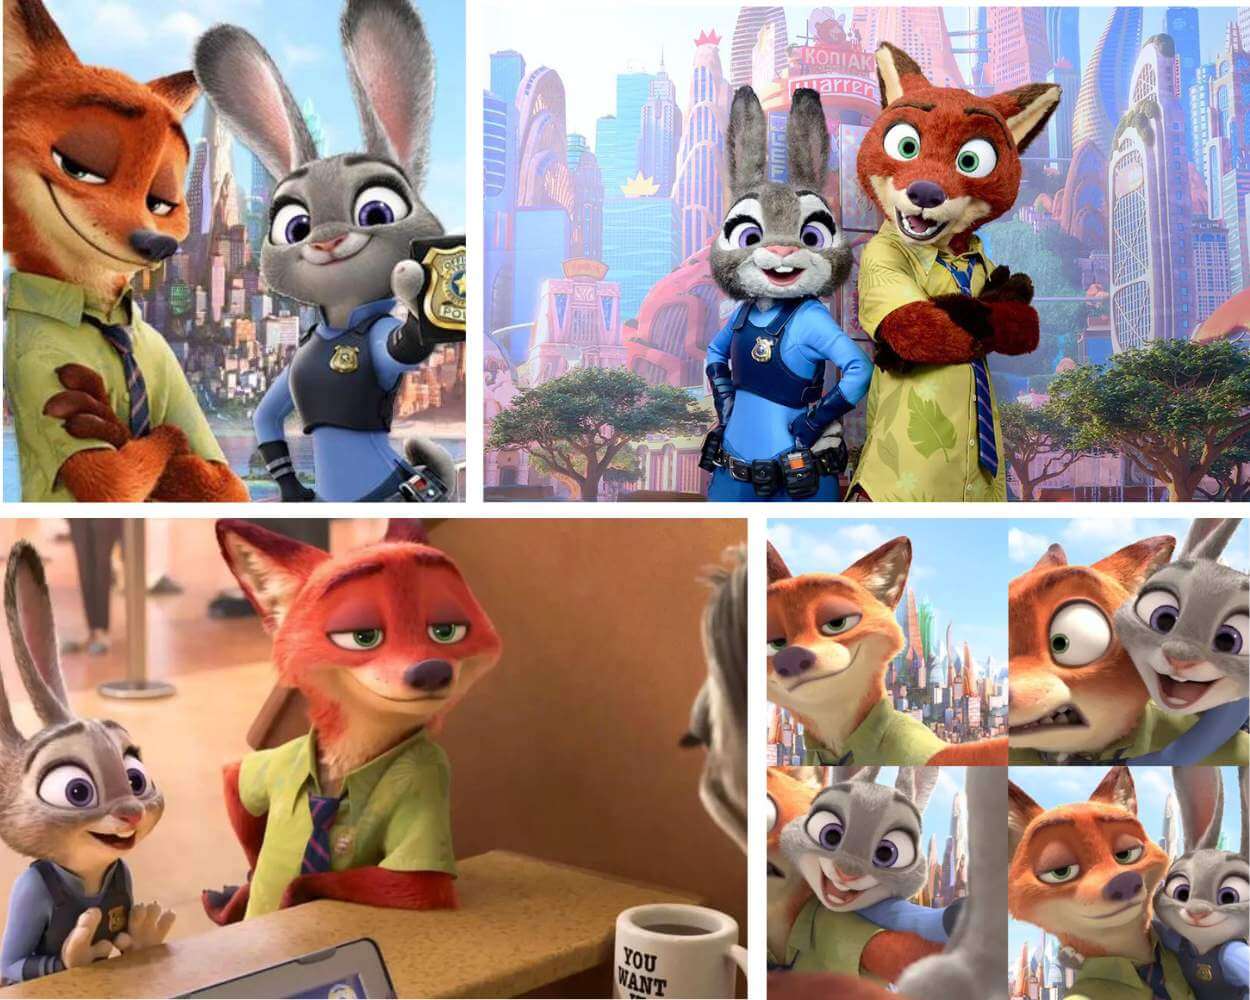 The Dynamic Duo - Judy Hopps and Nick Wilde